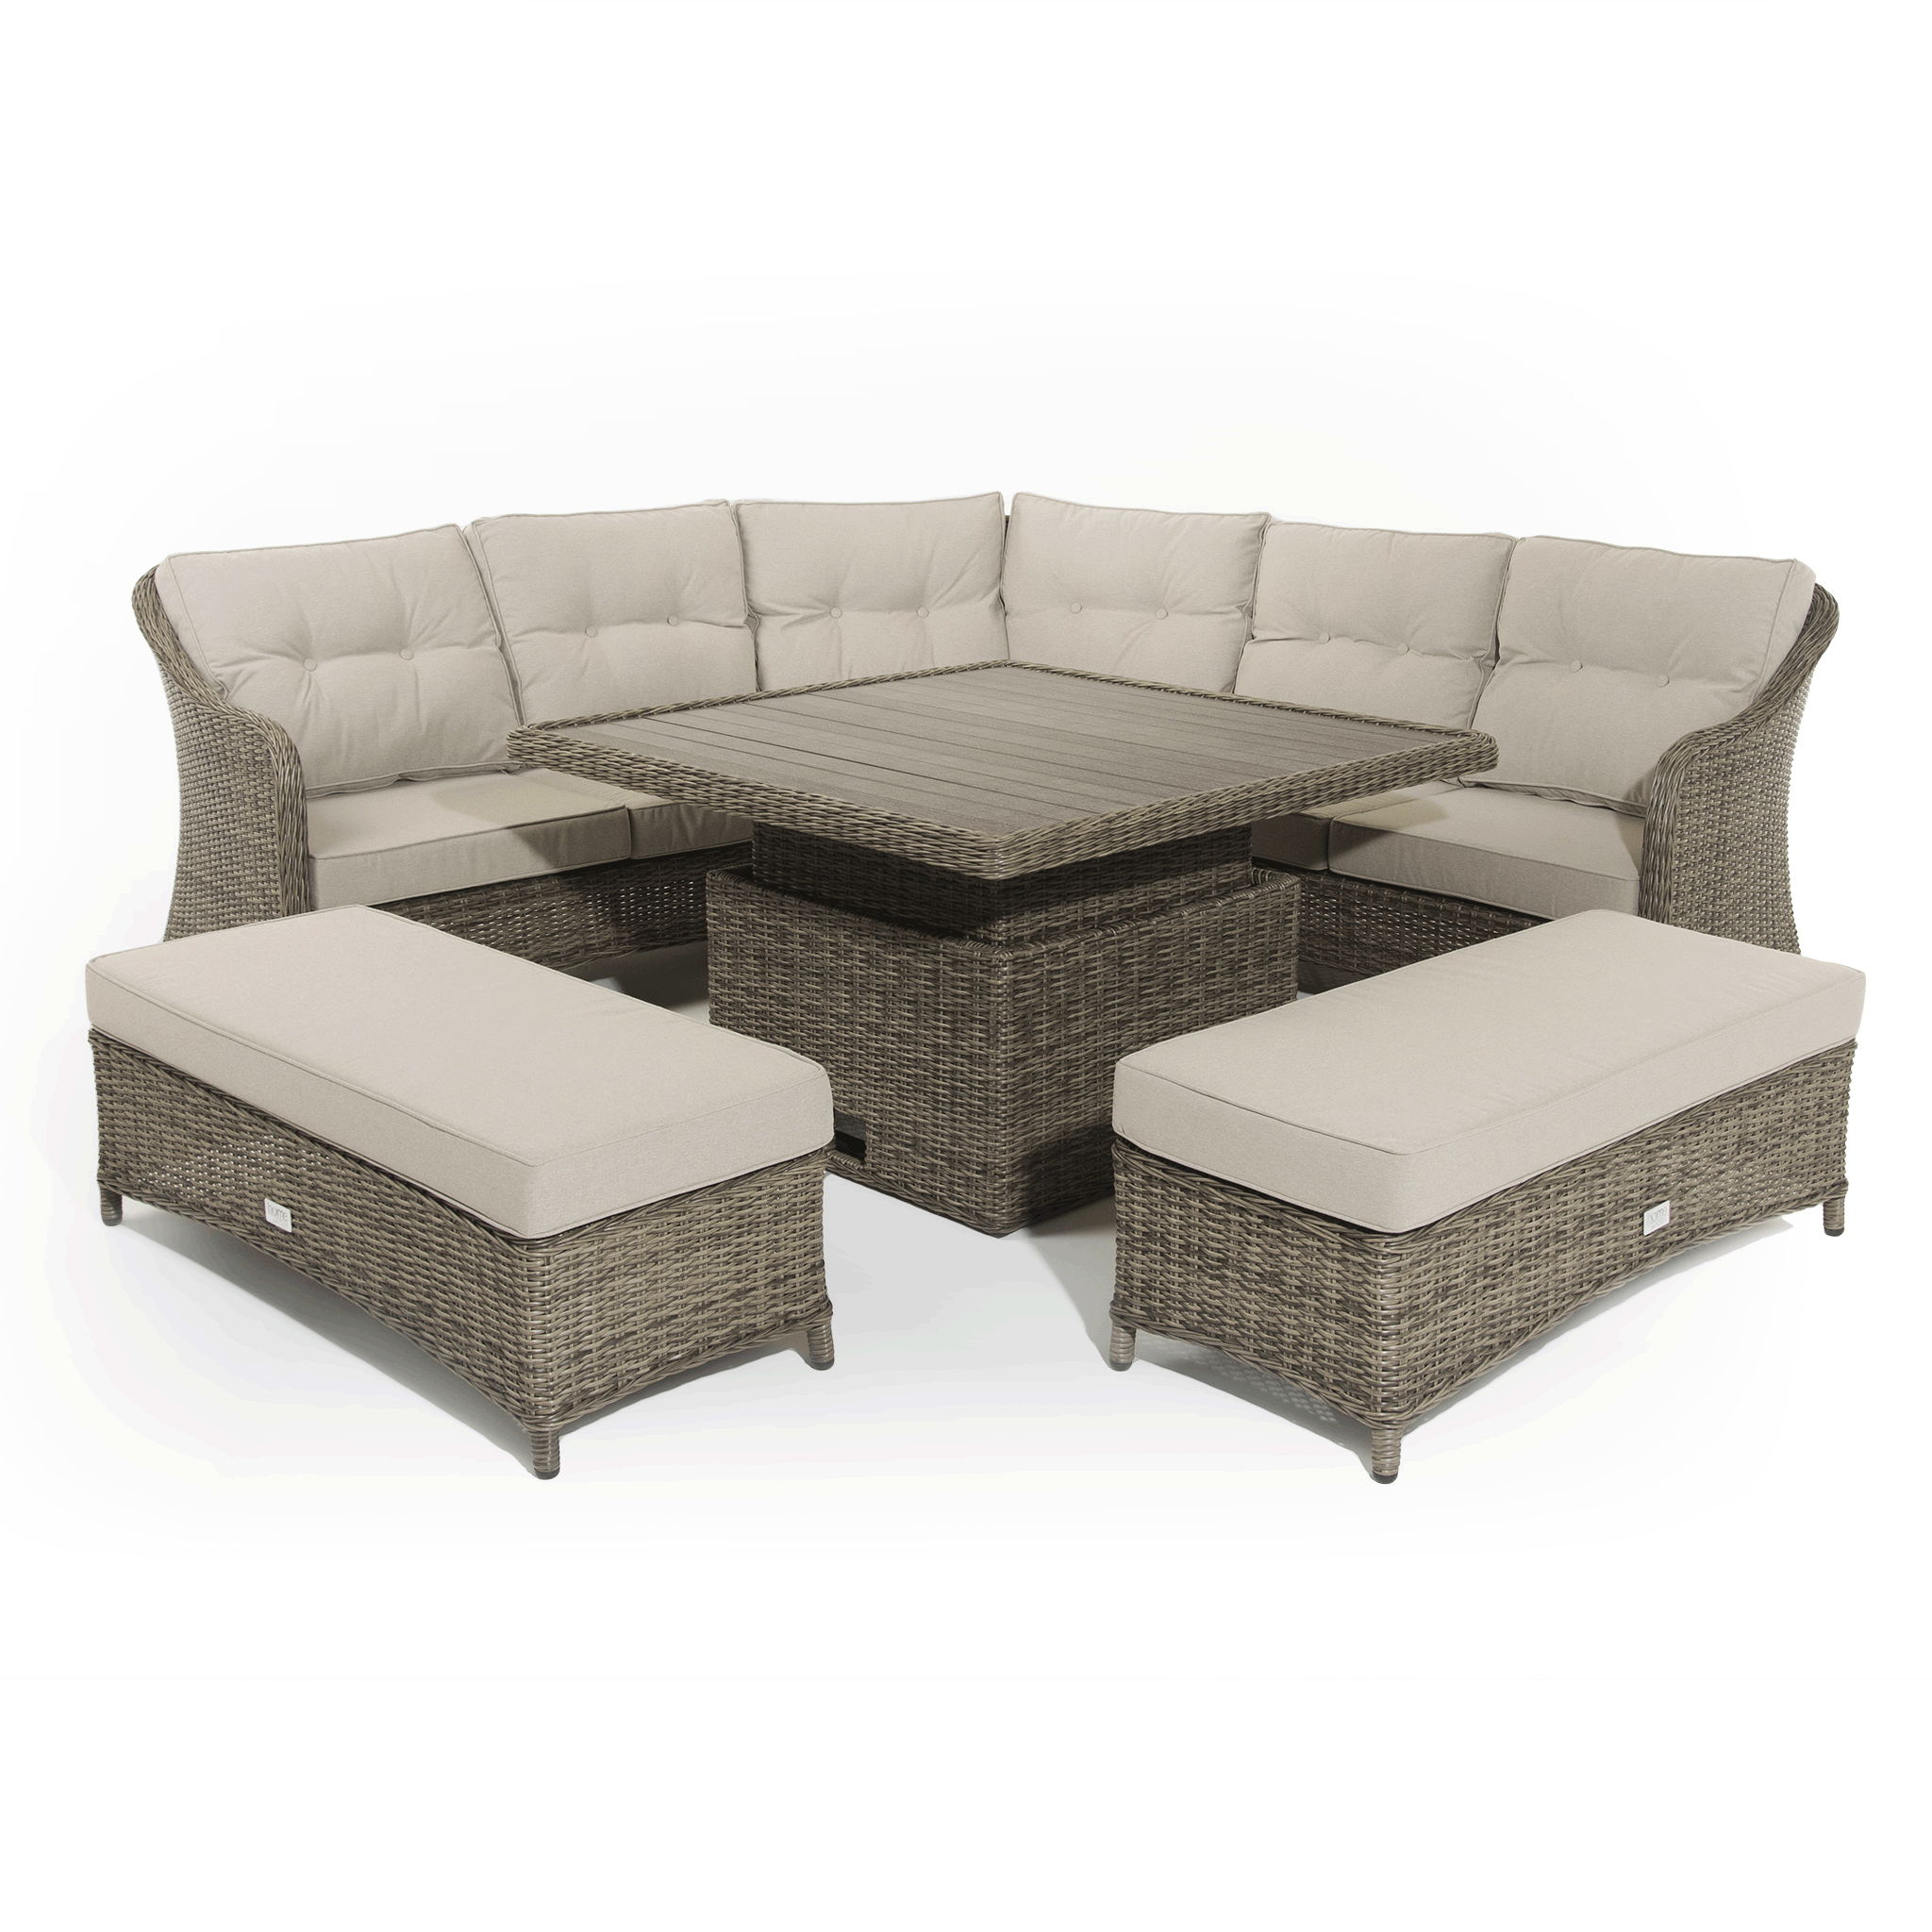 Hazz Corner Sofa with Rising Table and 2 Benches in Brown Rattan - Italiancityfurniture